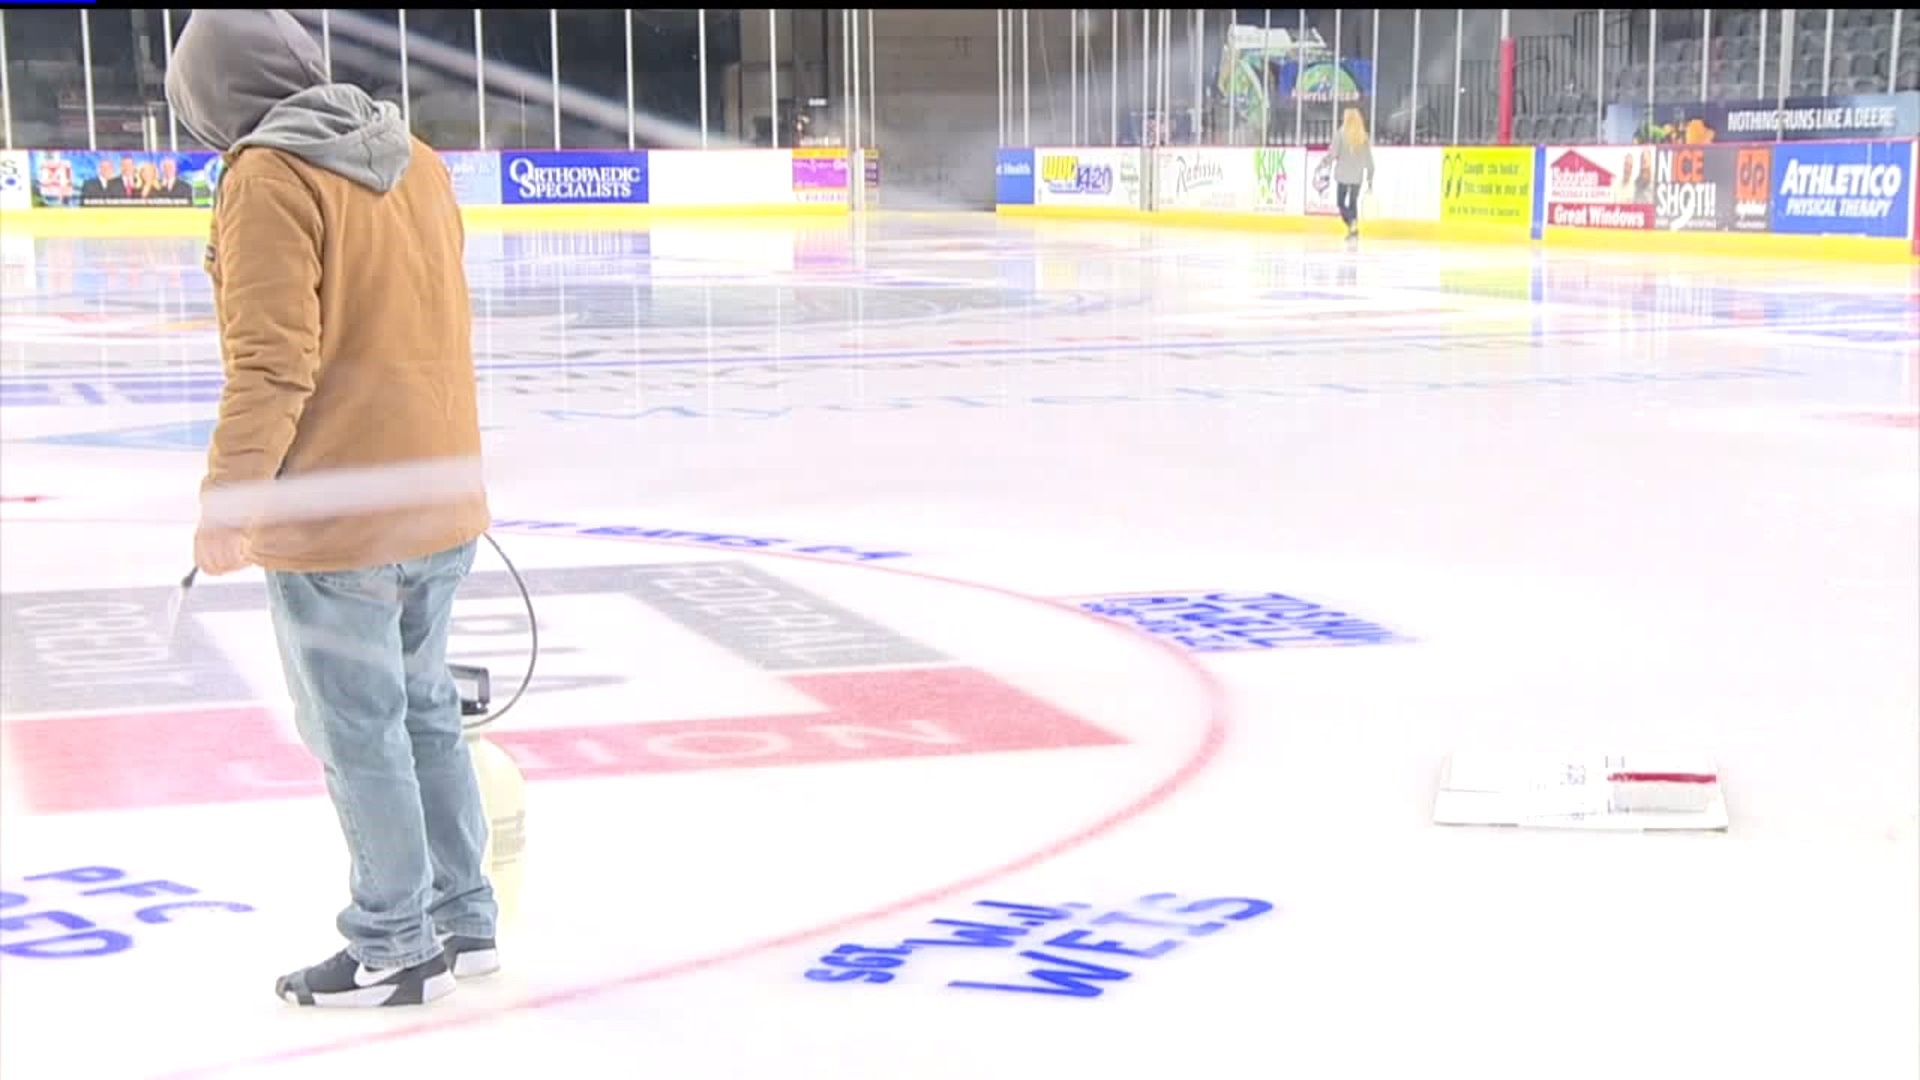 Veterans honored on ice at TaxSlayer Center